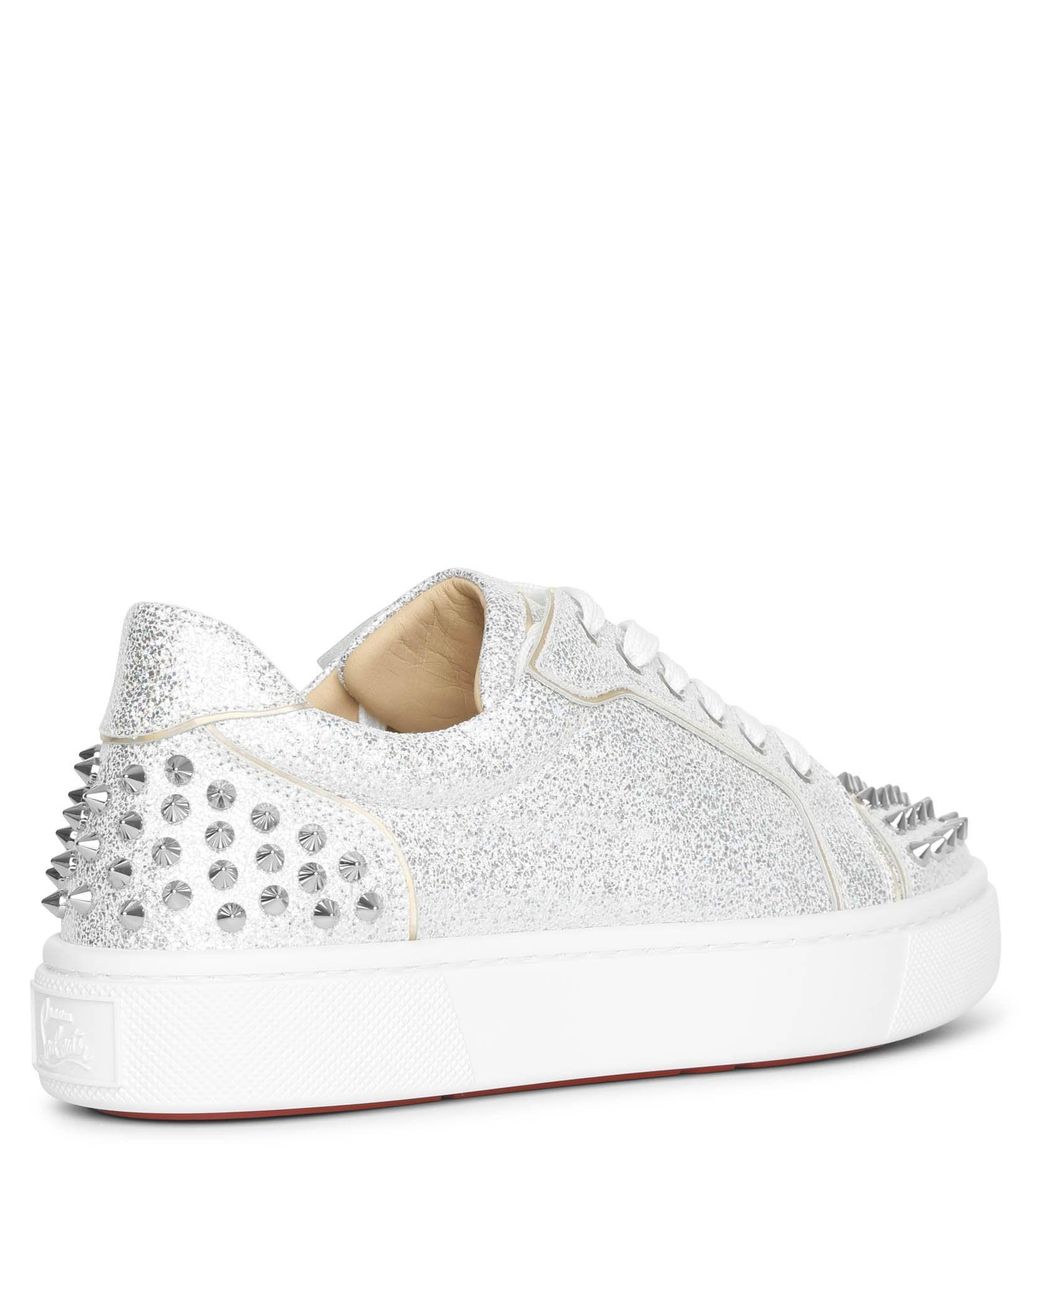 Christian Louboutin Leather Vierissima 2 Trainers in White - Lyst